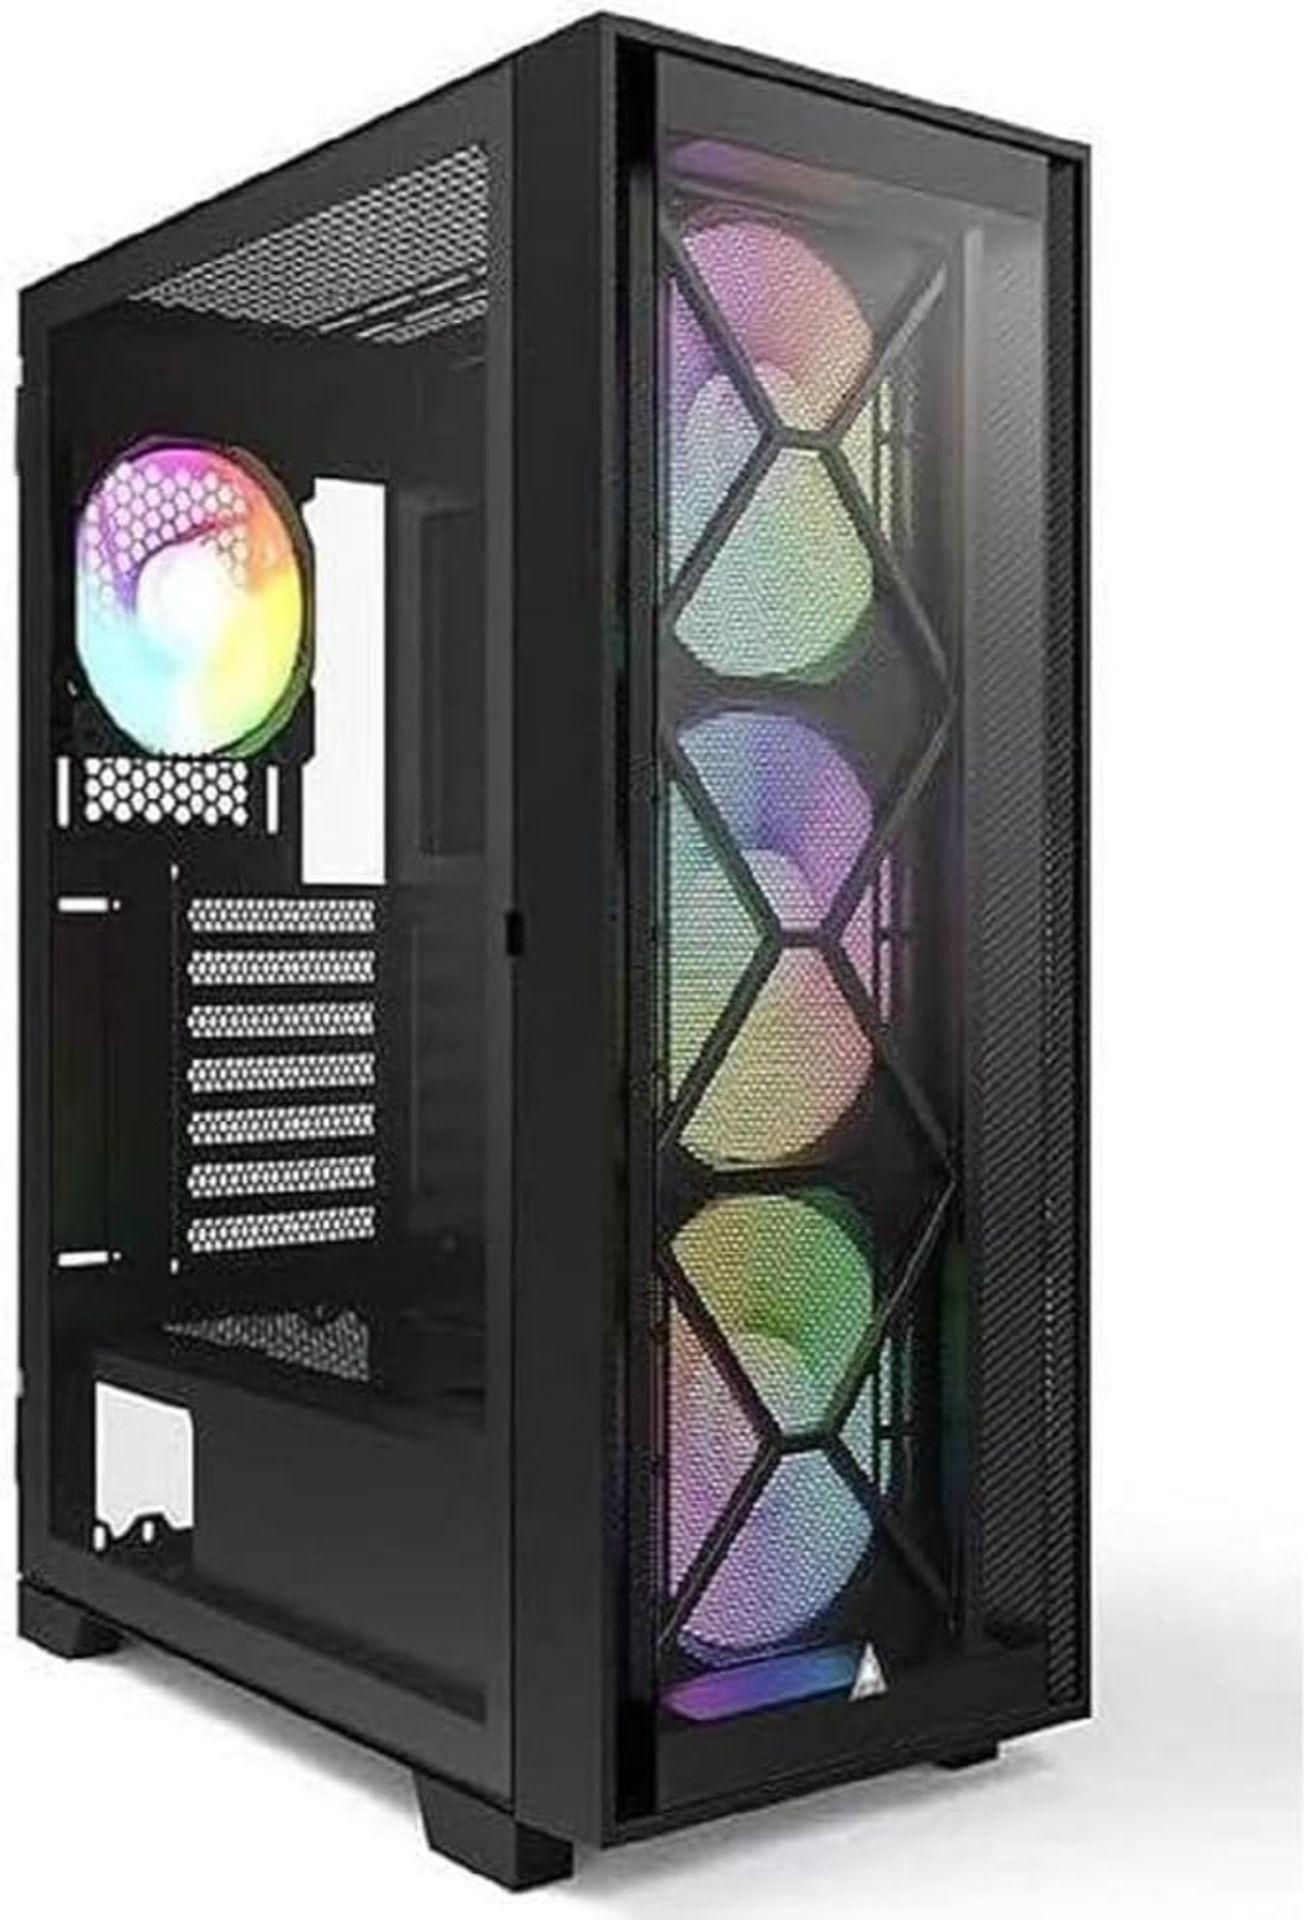 NEW & BOXED MONTECH Montech AIR 1000 Premium Black ATX Mid Tower Case. RRP £151. (PCK5E). With two